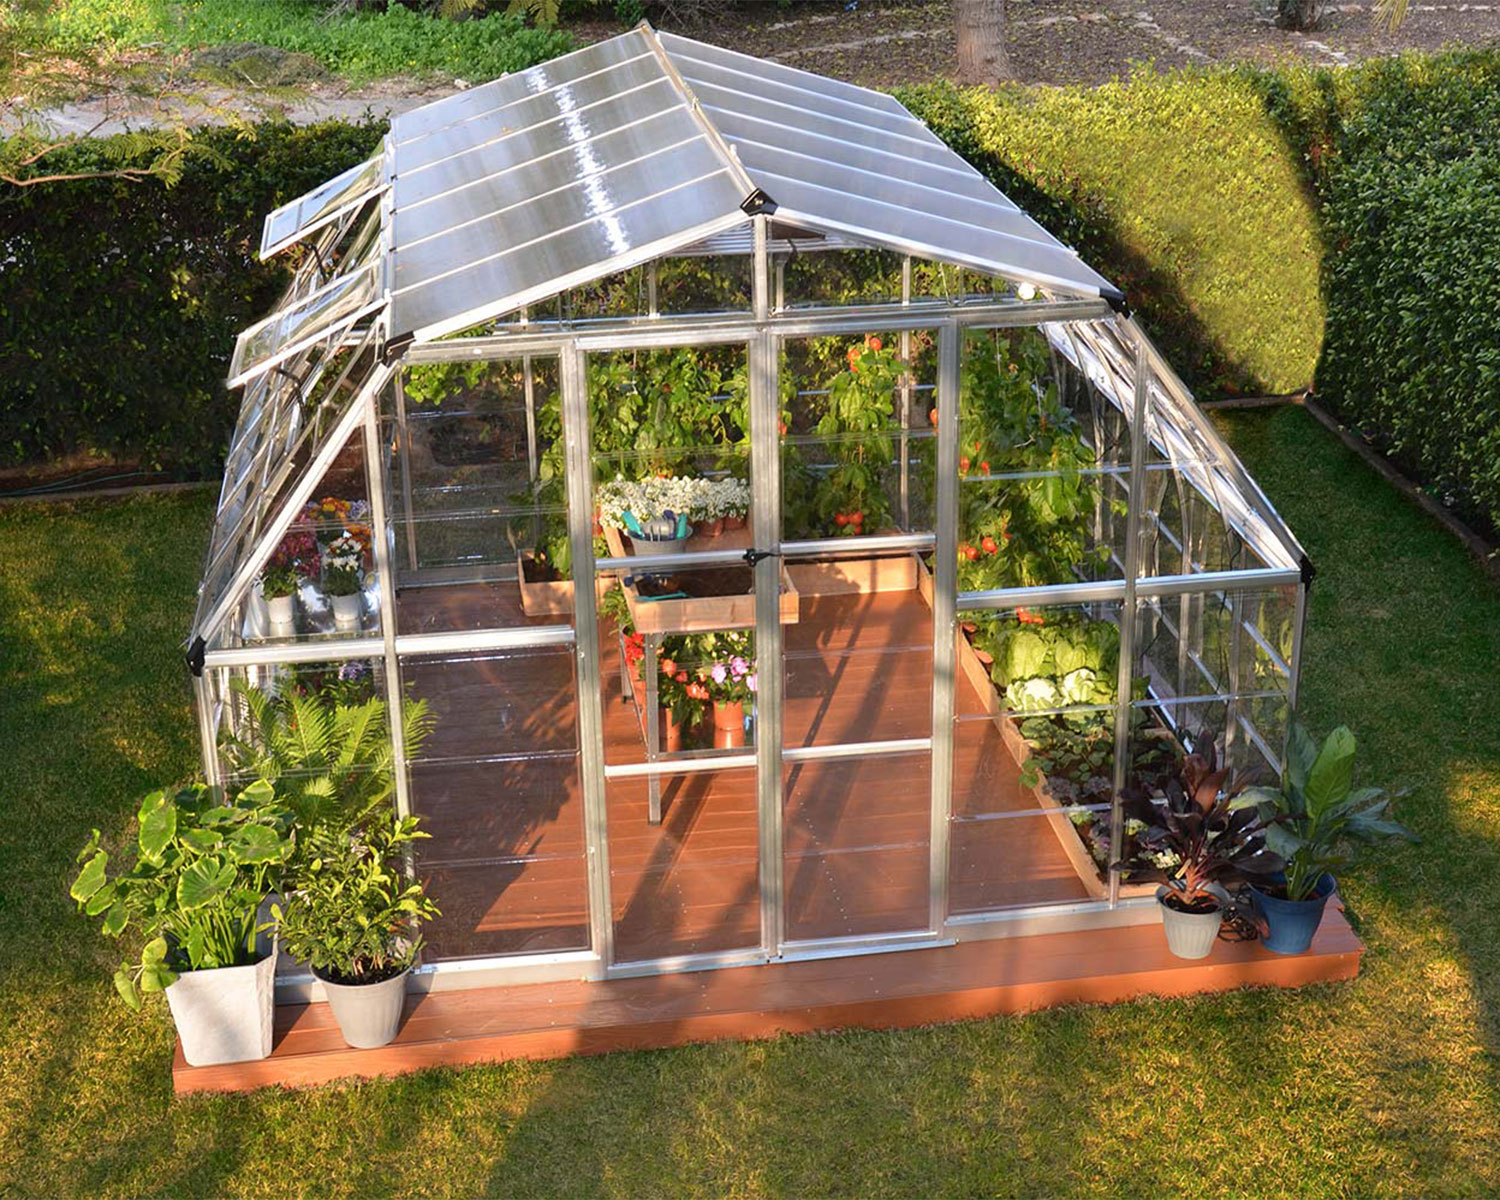 above view of Greenhouse Kit Americana 12 ft. x 12 ft. with clear polycarbonate panels in a garden